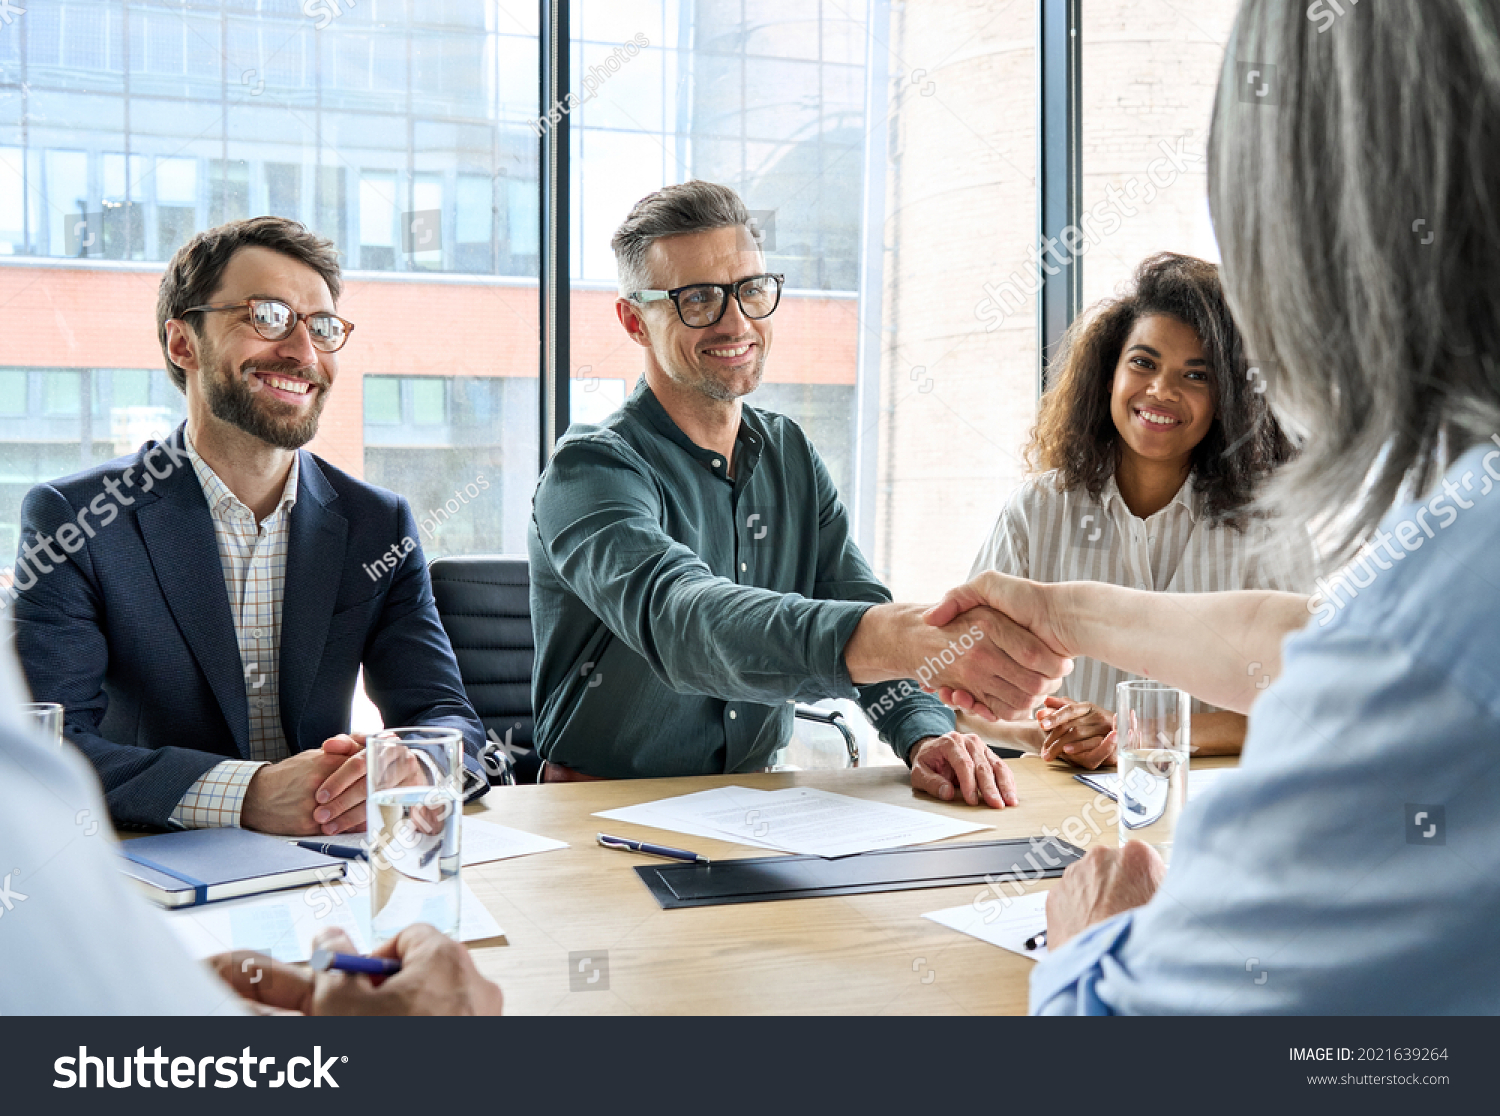 Happy businessman and businesswoman shaking hands at group board meeting. Professional business executive leaders making handshake agreement successful company trade partnership handshake concept. #2021639264